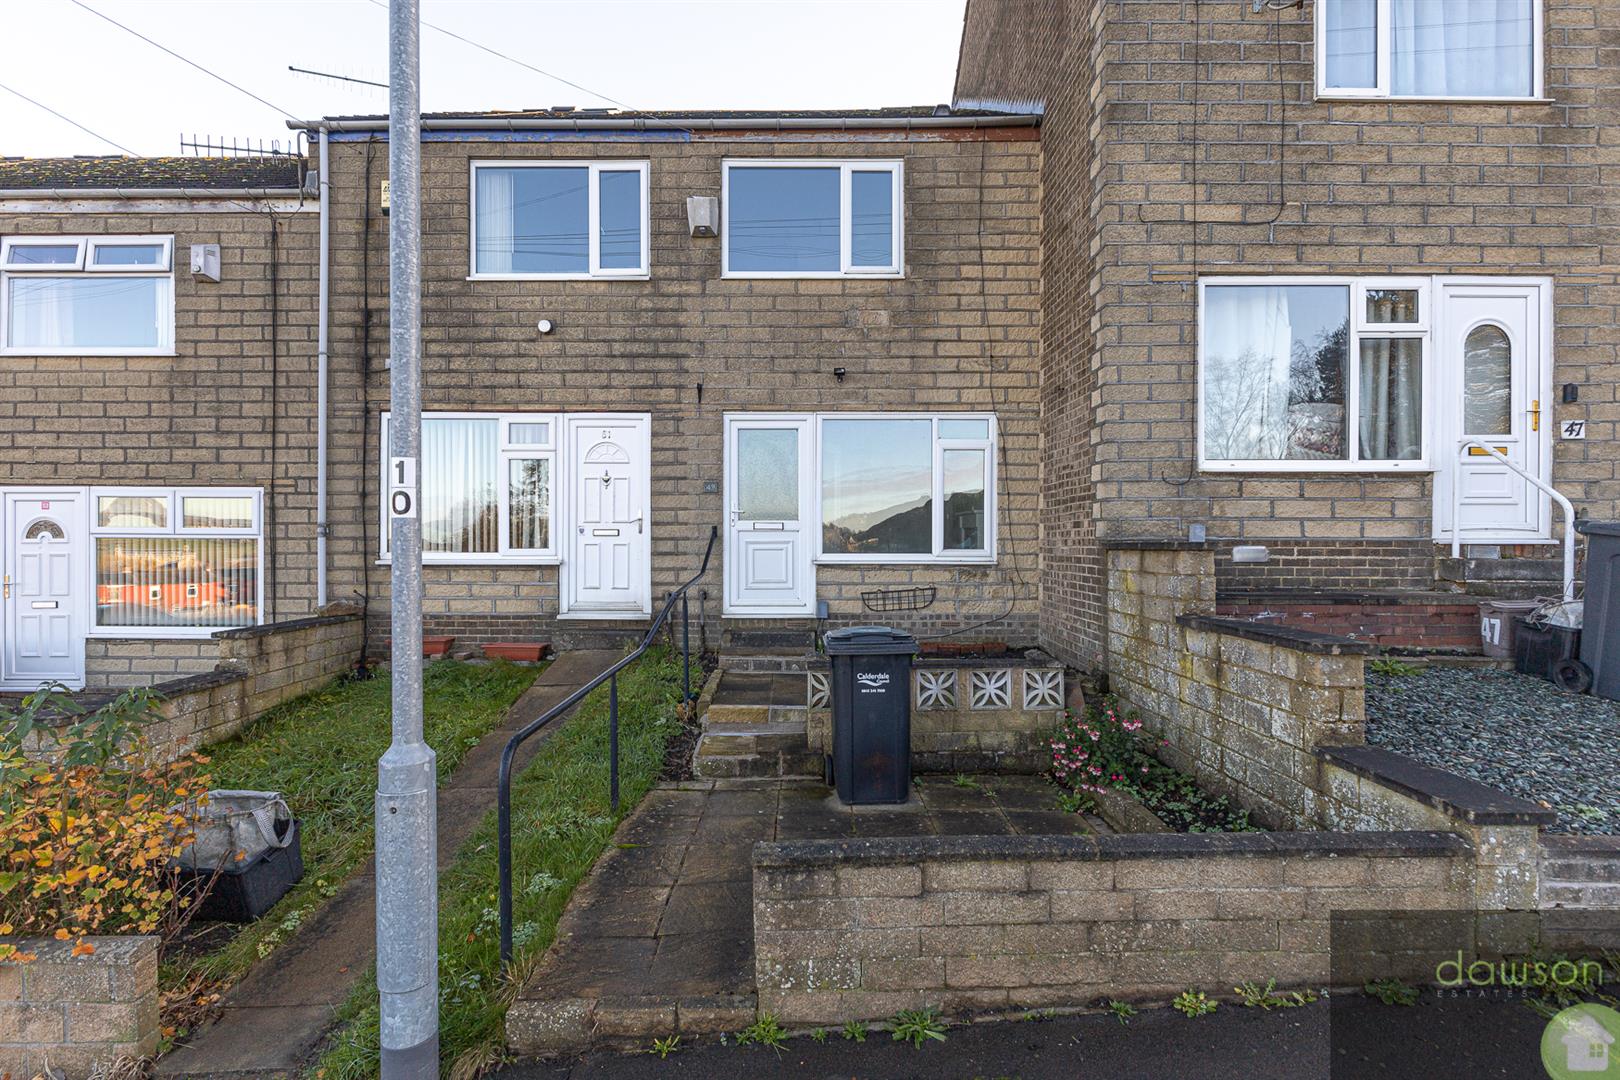 2 bed  to rent in Whitwell Green Lane, Elland, HX5 